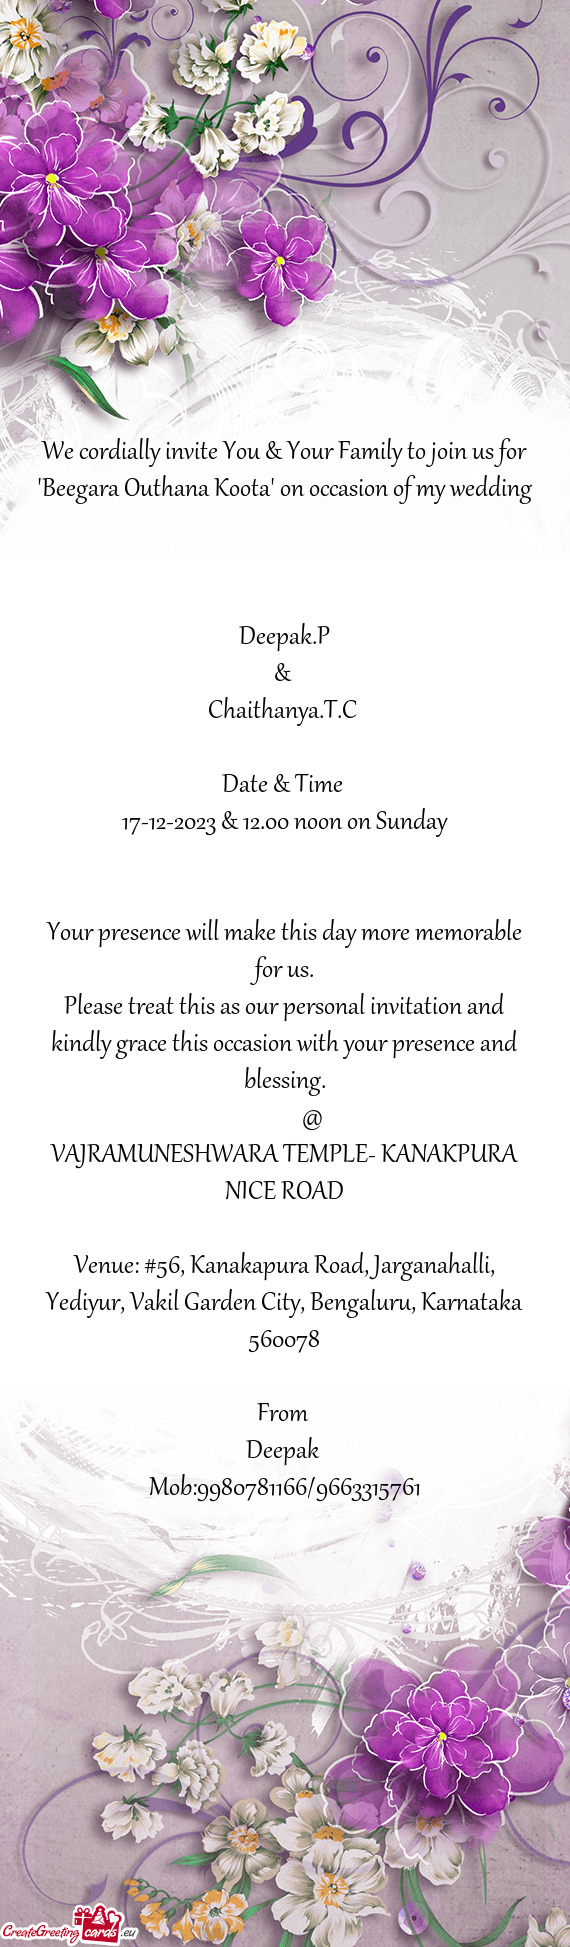 We cordially invite You & Your Family to join us for "Beegara Outhana Koota" on occasion of my weddi